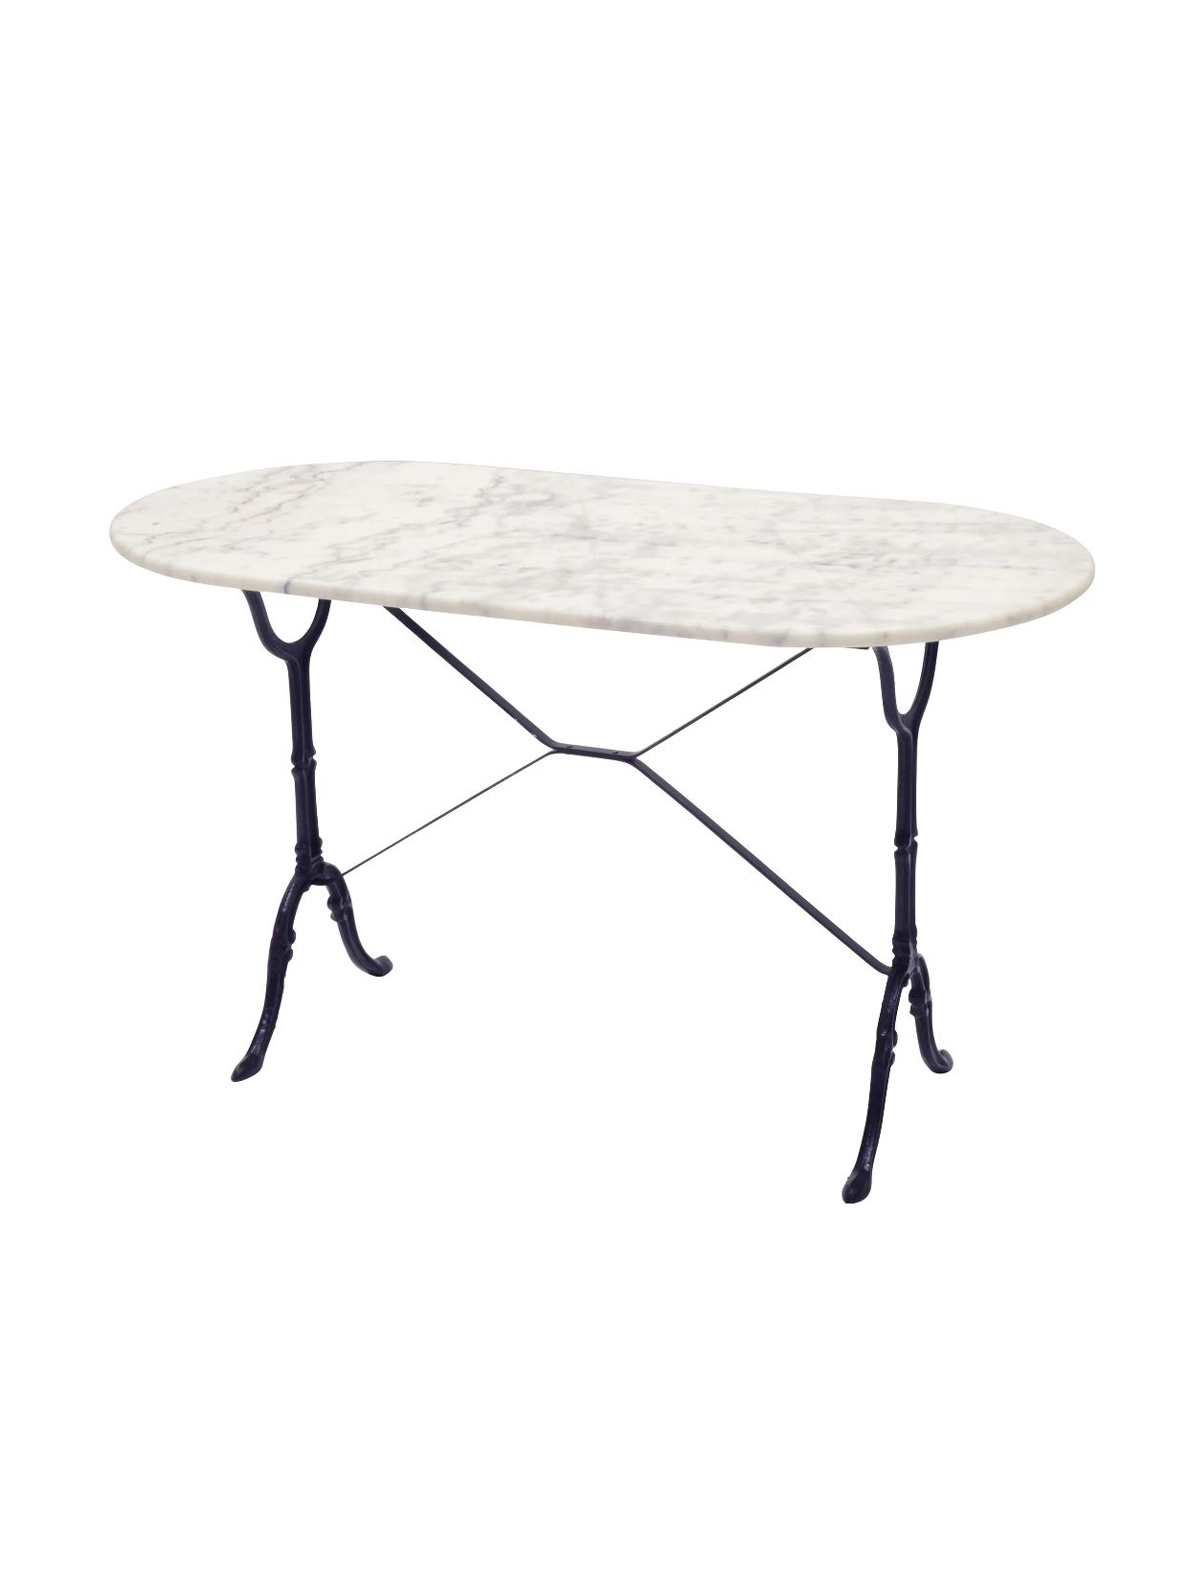 Vintage Marble Cafe Table, Cast Iron Legs, Oval Top